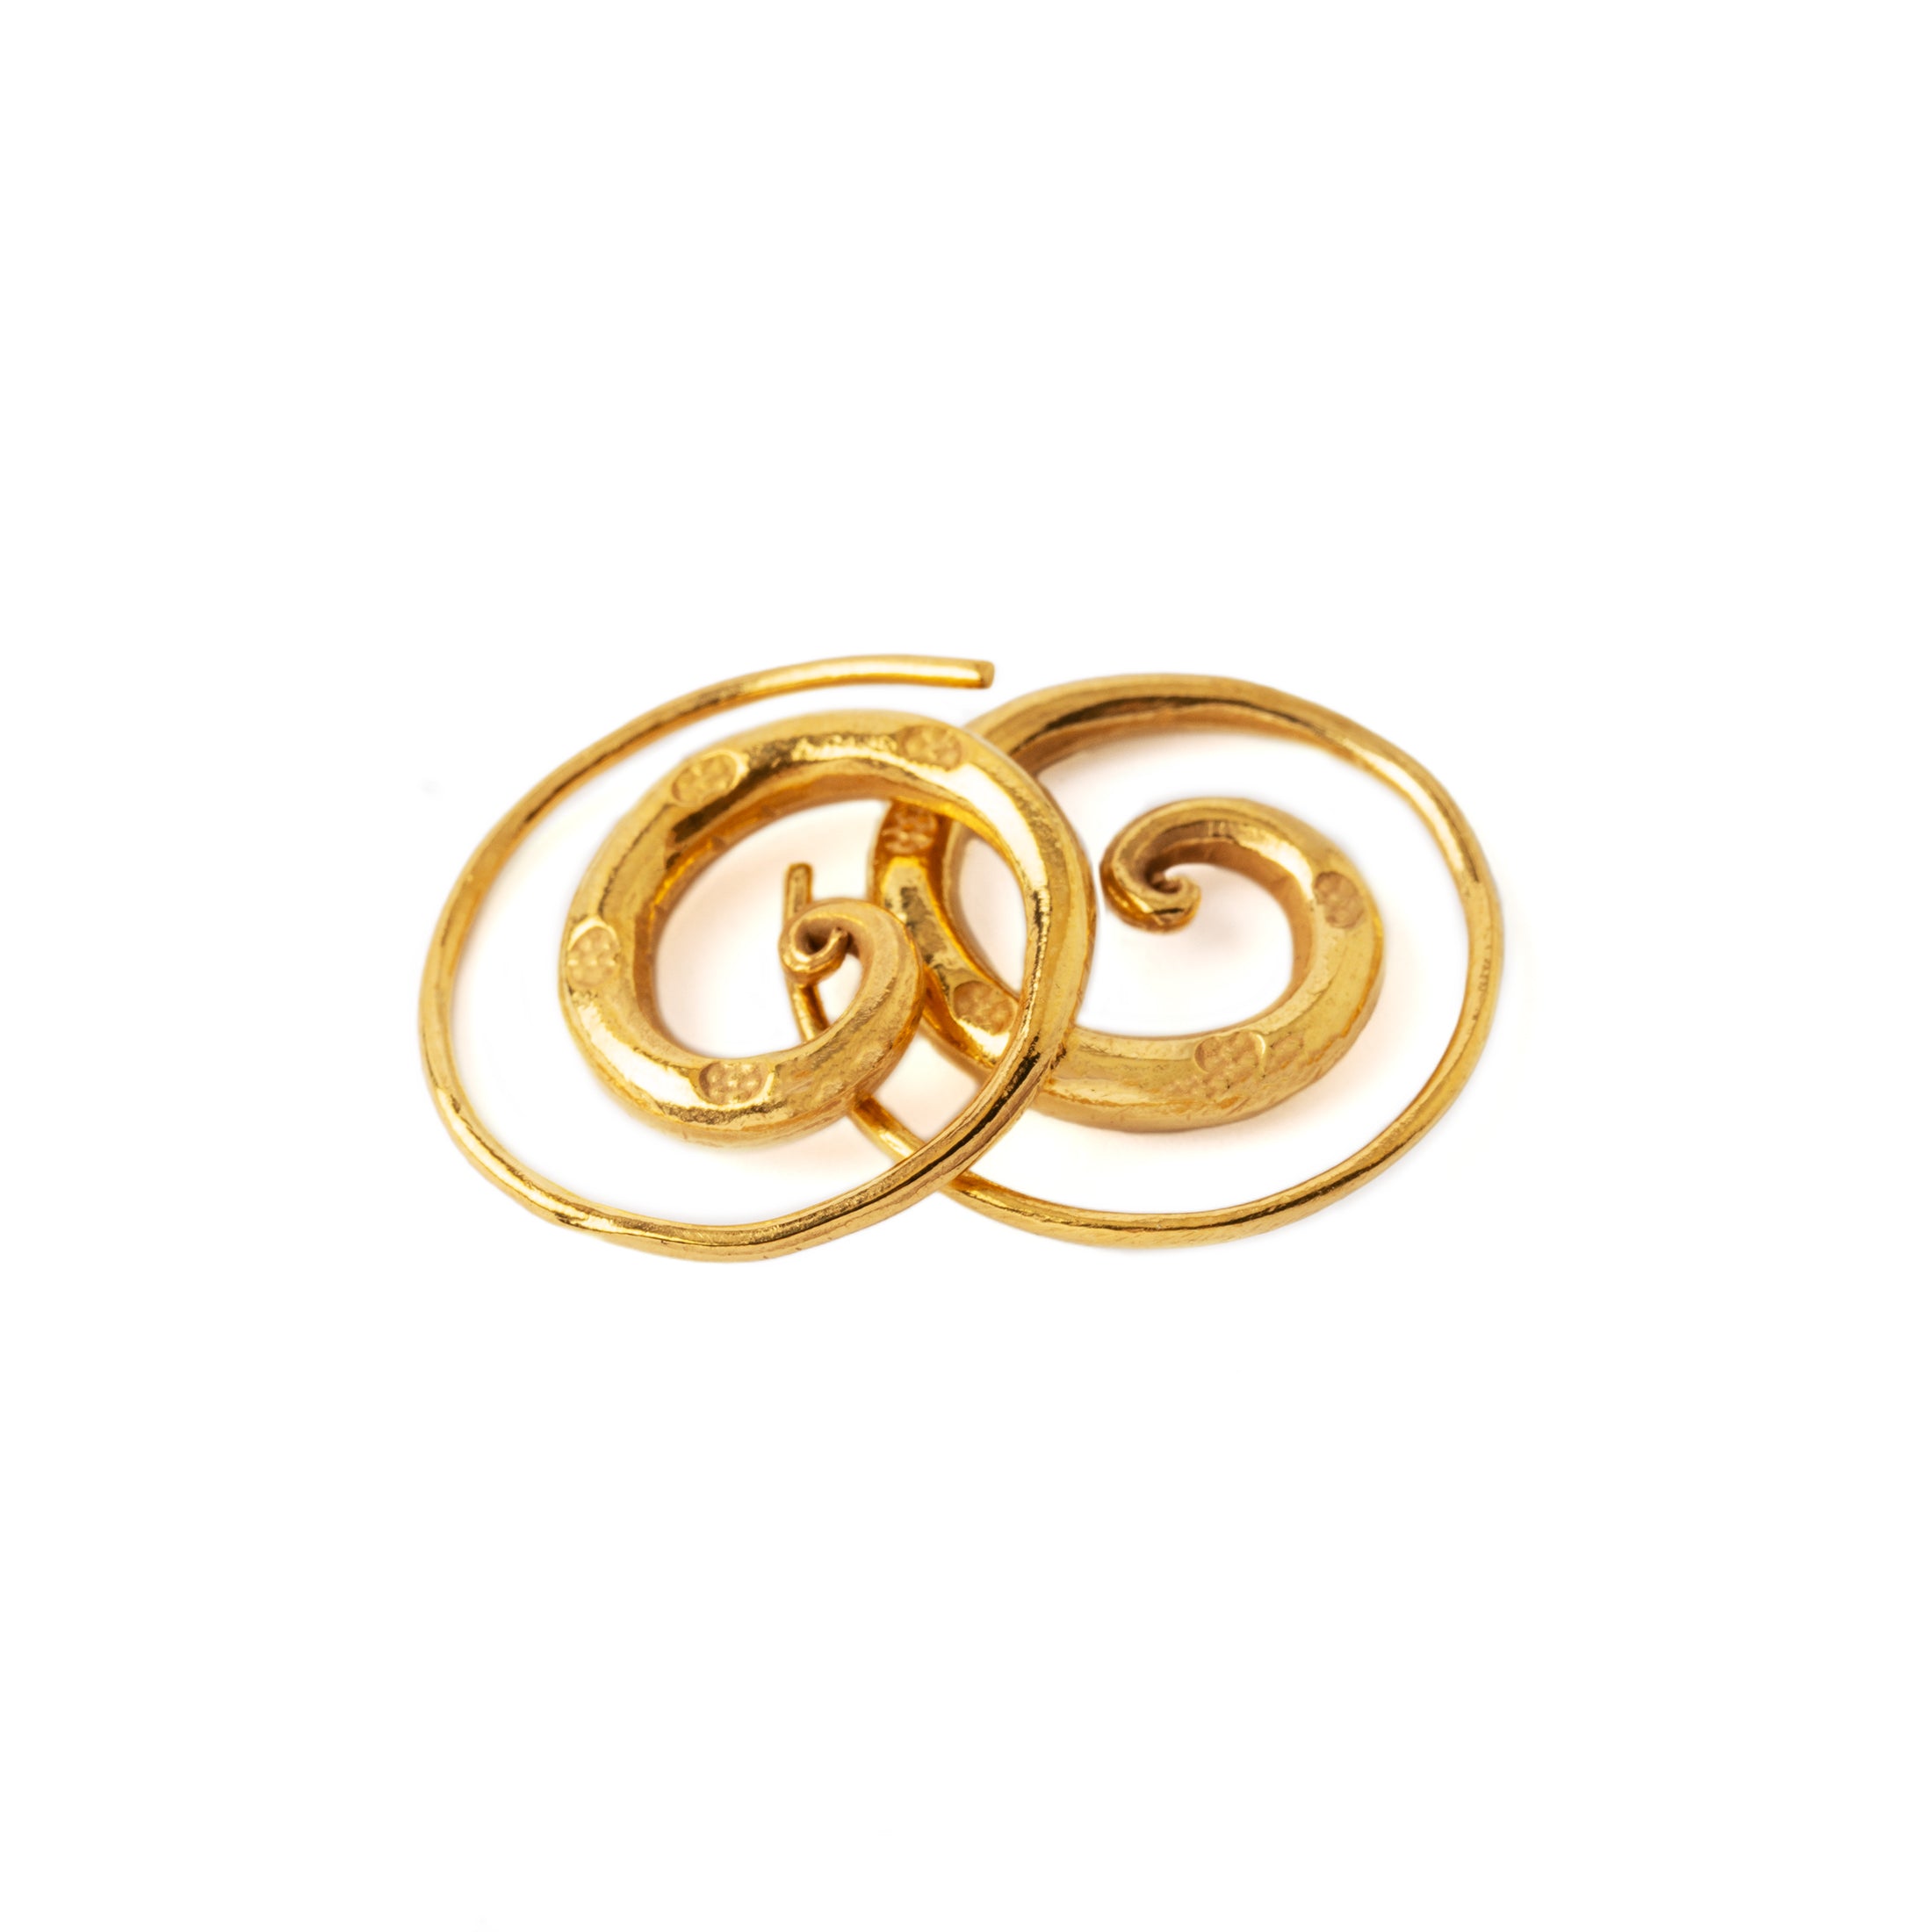 Stamped Gold Spiral Earrings front and side view